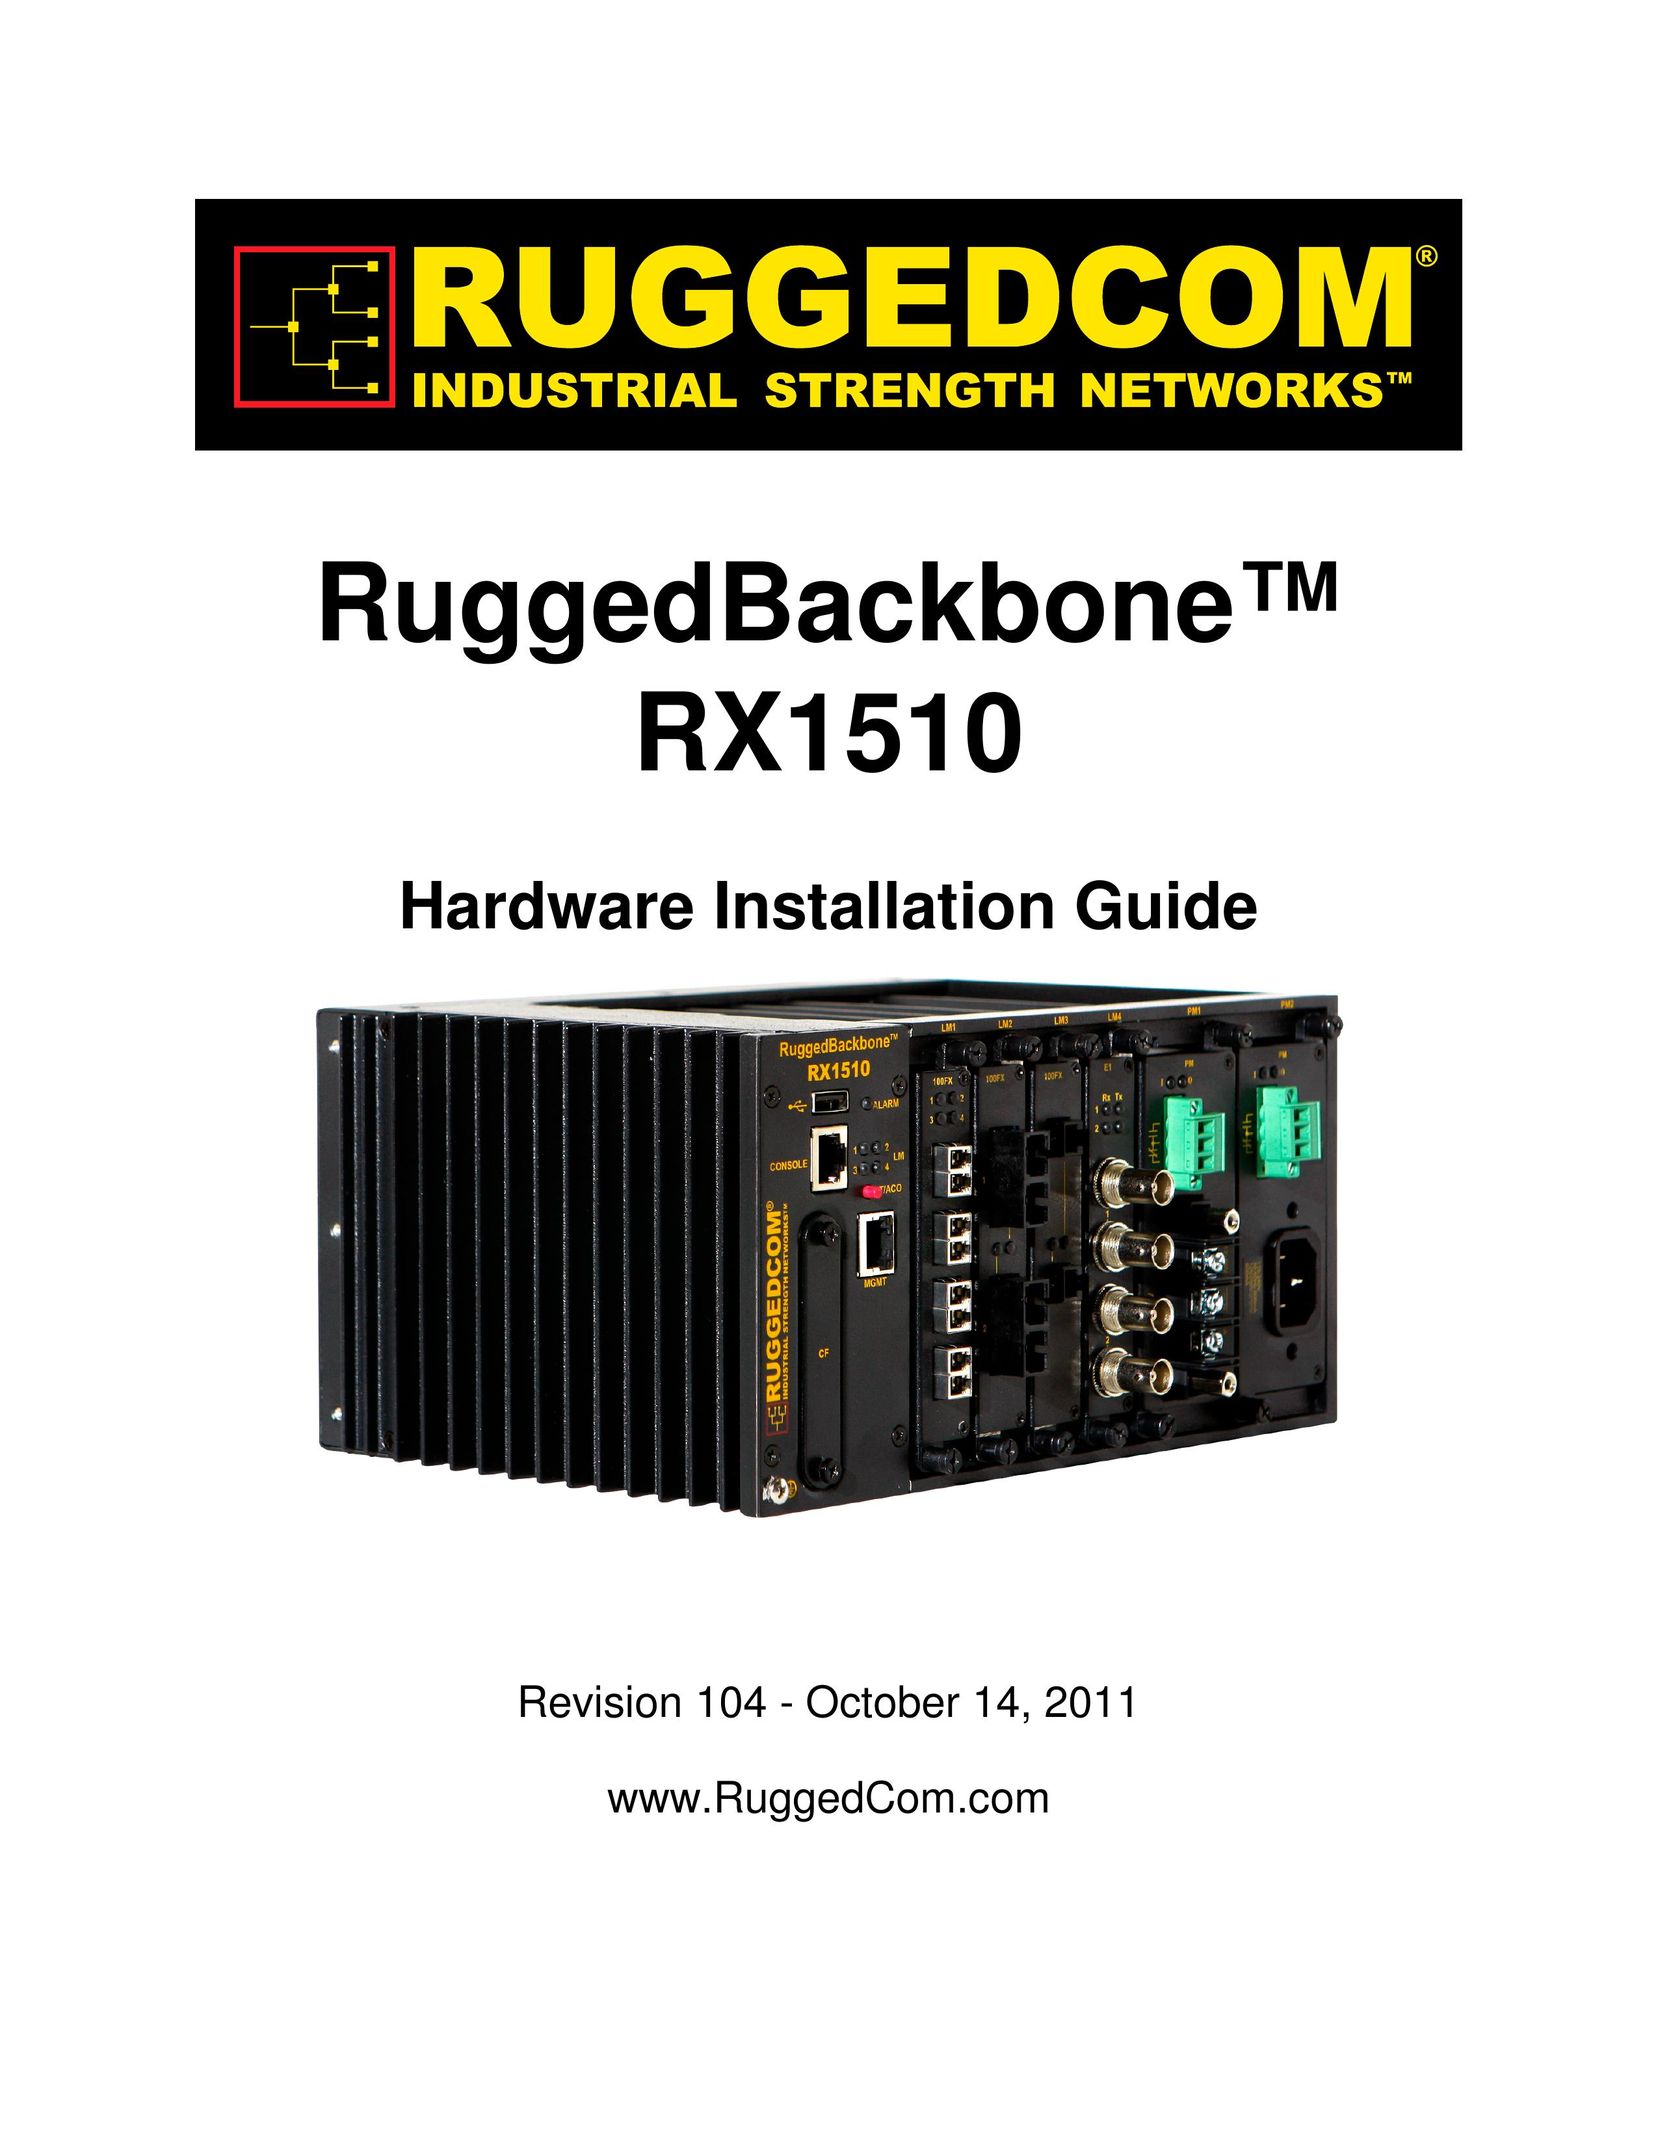 RuggedCom RX1510 Network Router User Manual